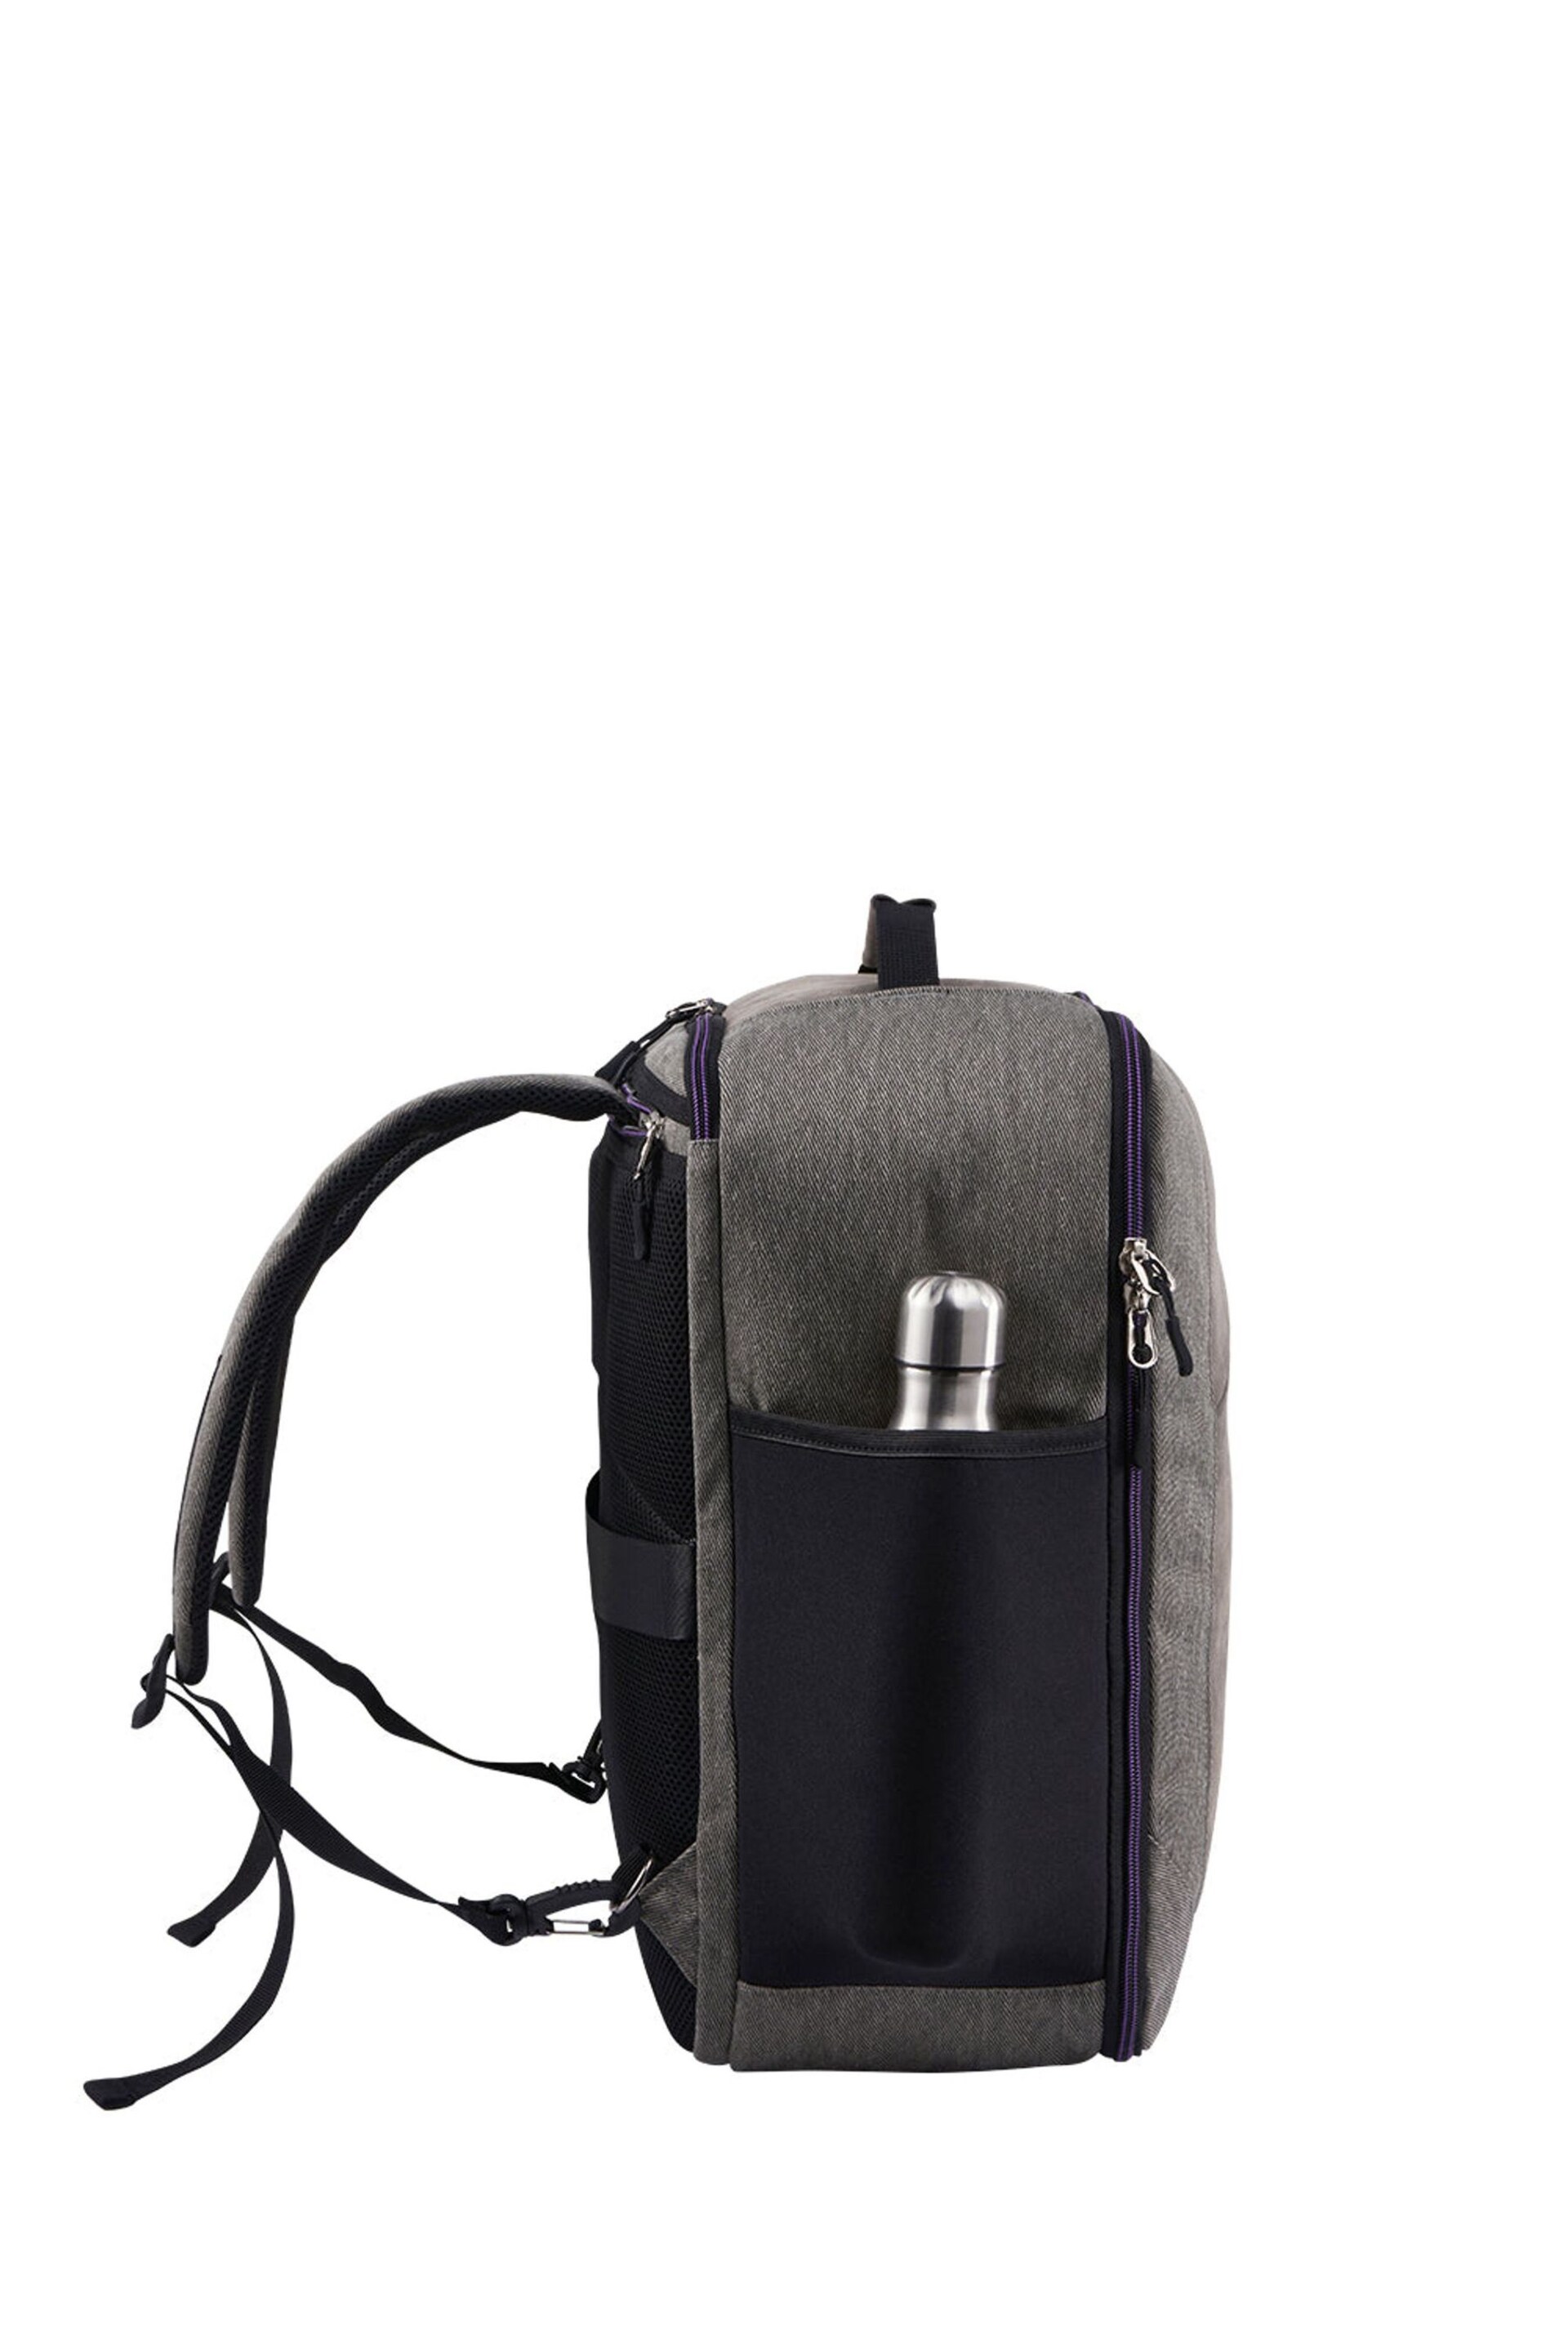 Cabin Max Underseat Backpack 30 Litre 45cm - Image 4 of 5